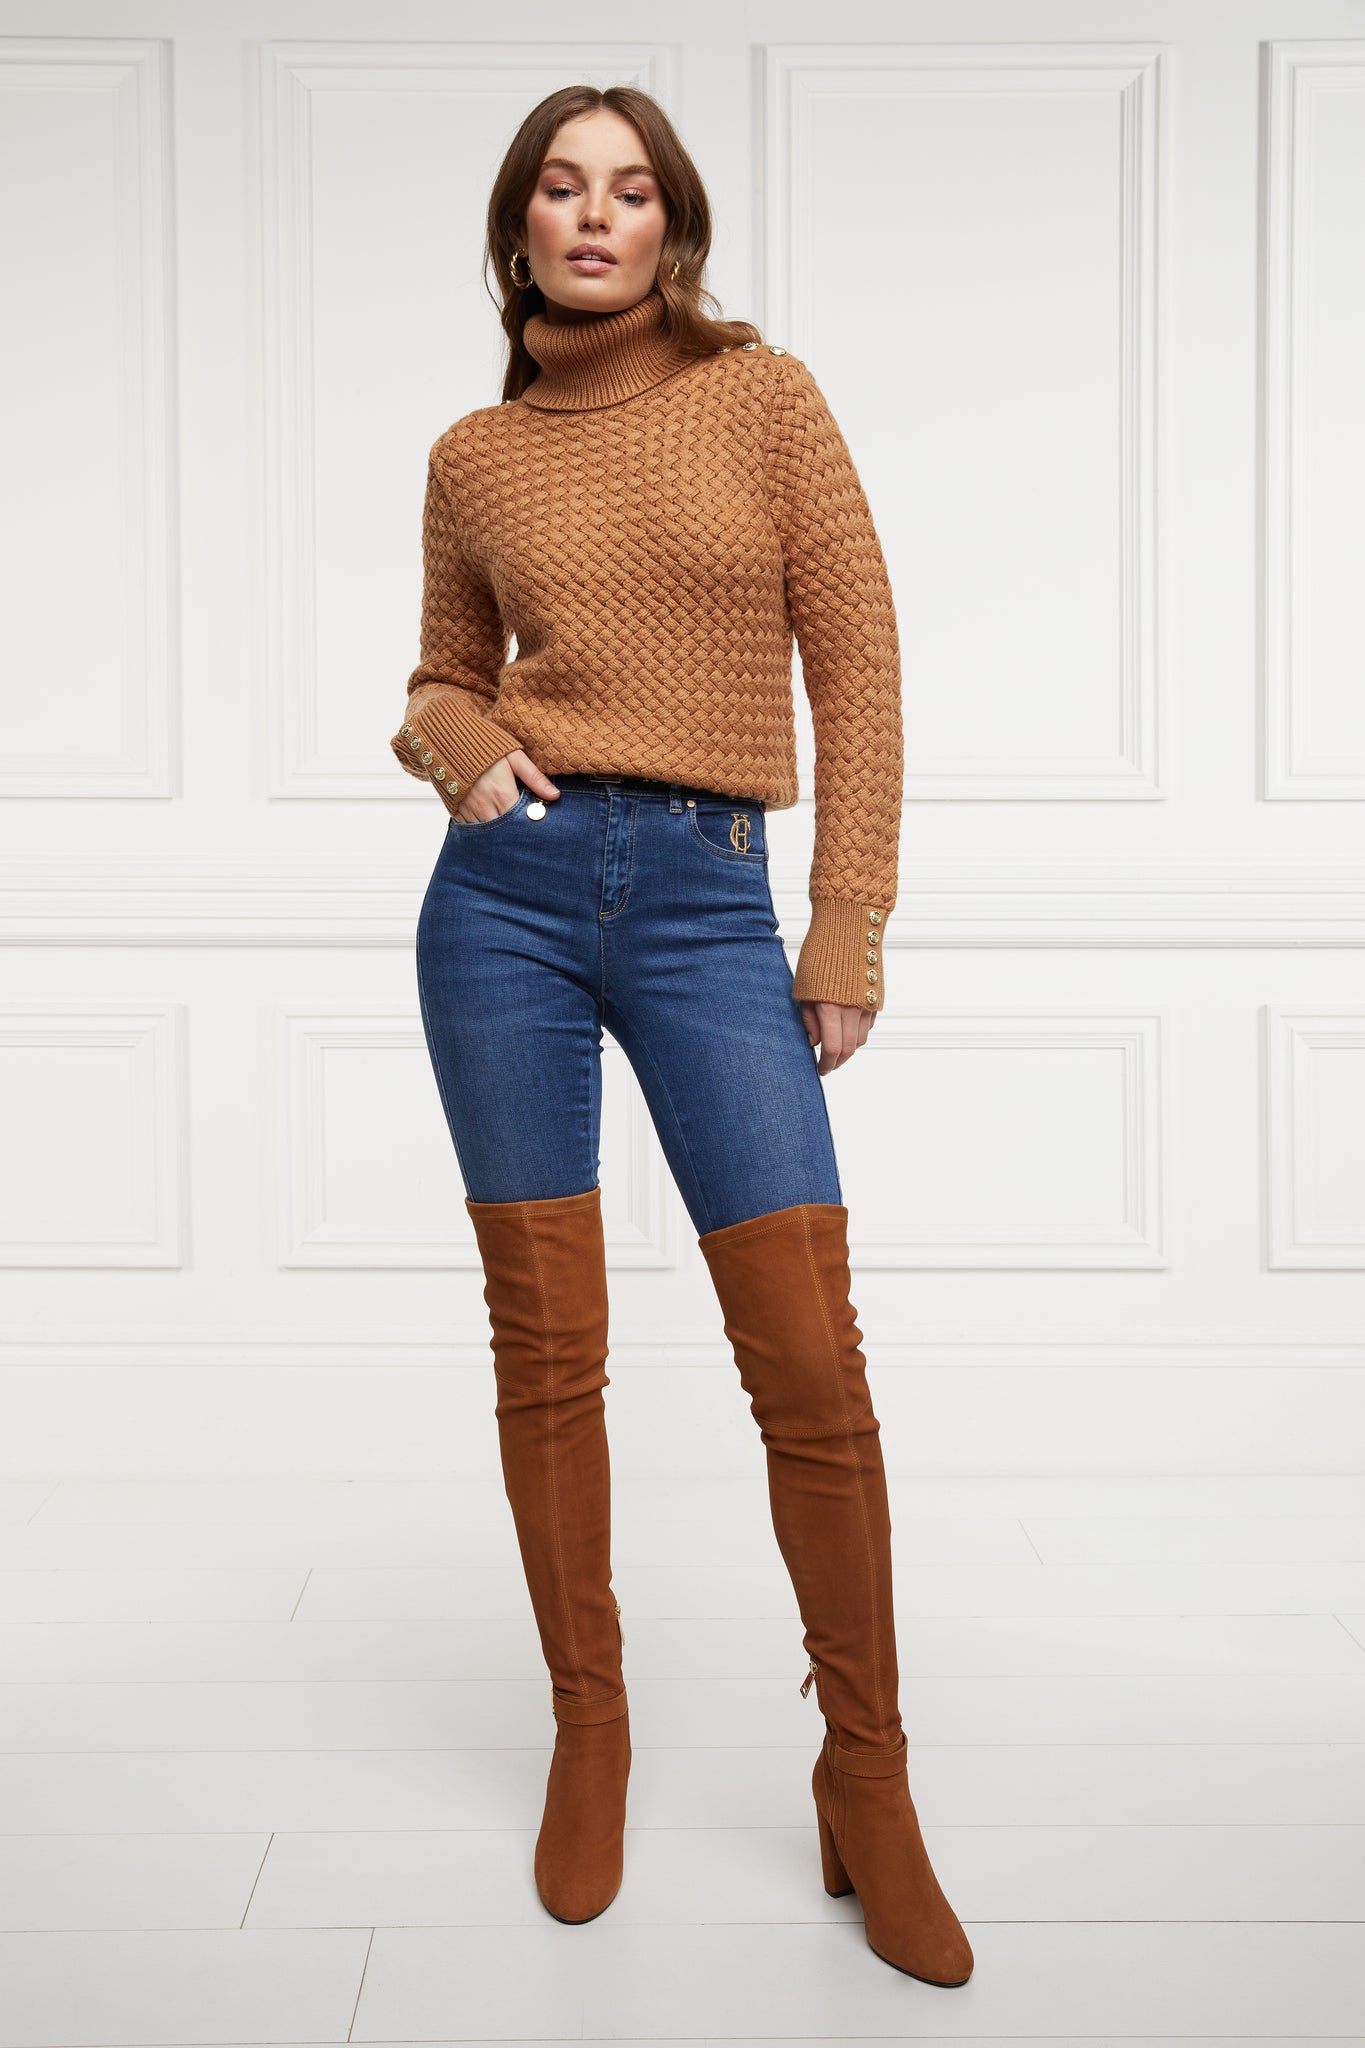 womens lightweight roll neck basket weave knit jumper in caramel worn with indigo blue jeans and tan over the knee boots